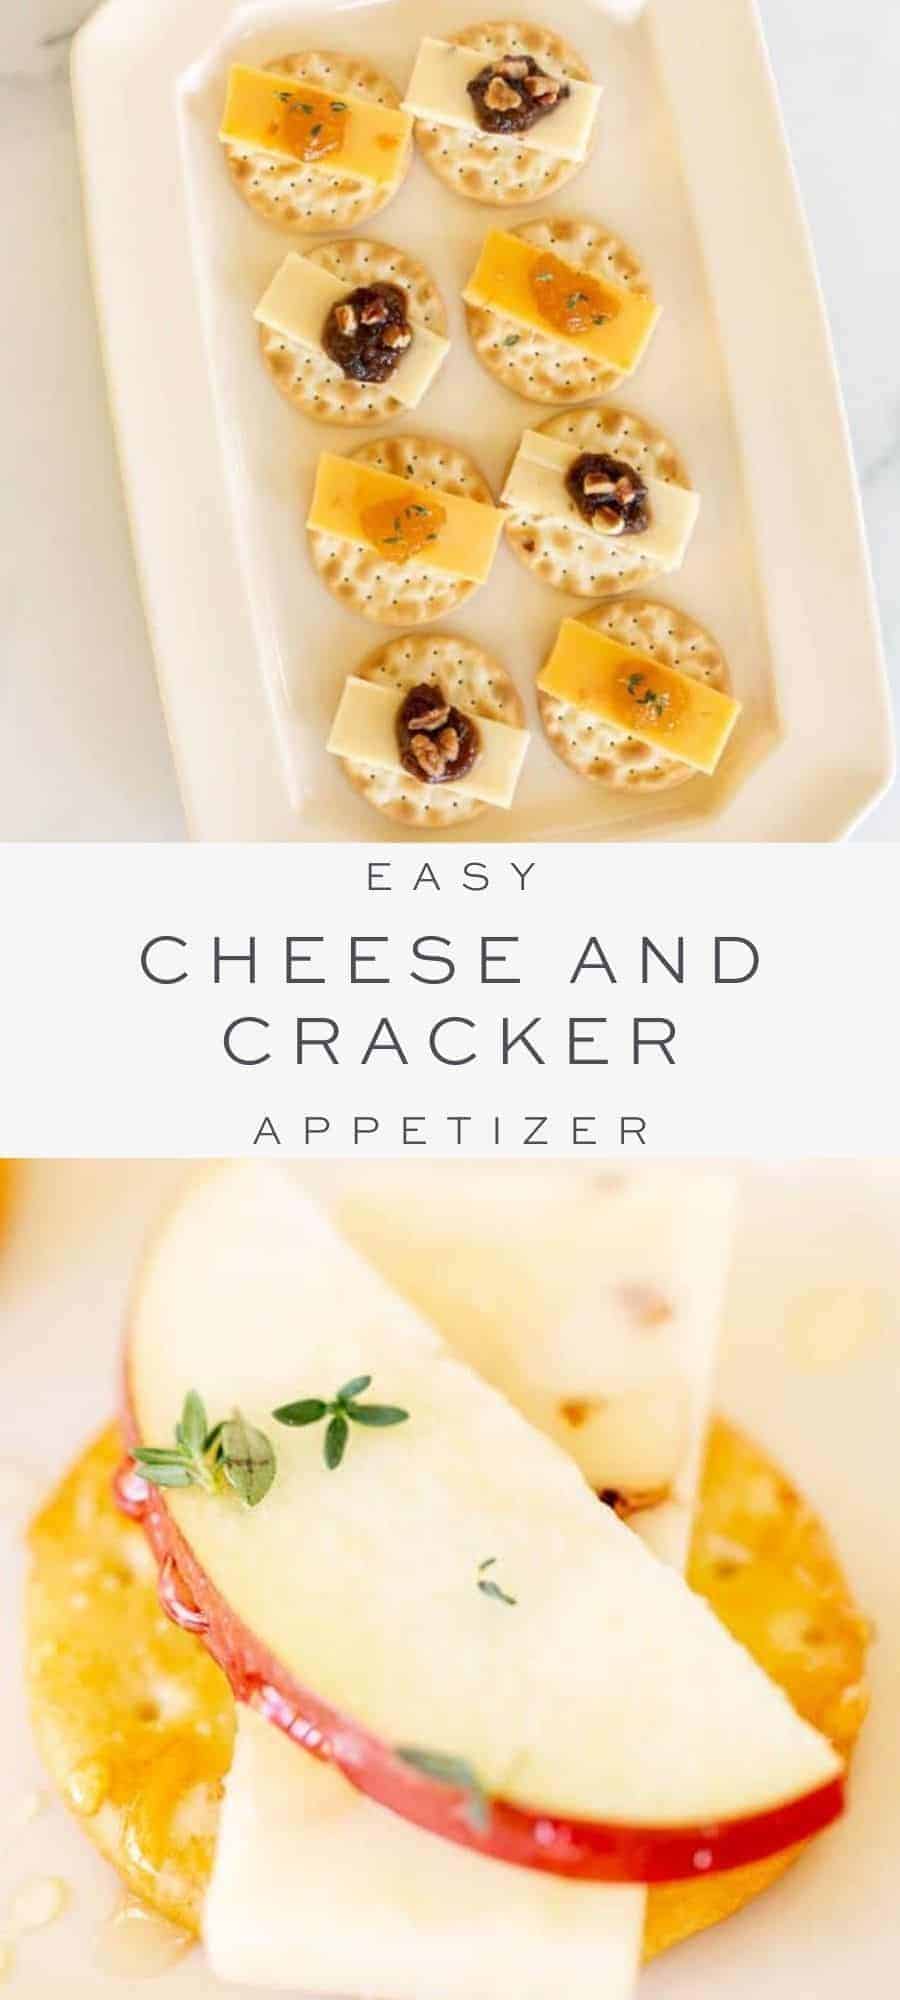 tray of crackers with cheese and jam, overlay text, close up of cracker with cheese slice and apple slice